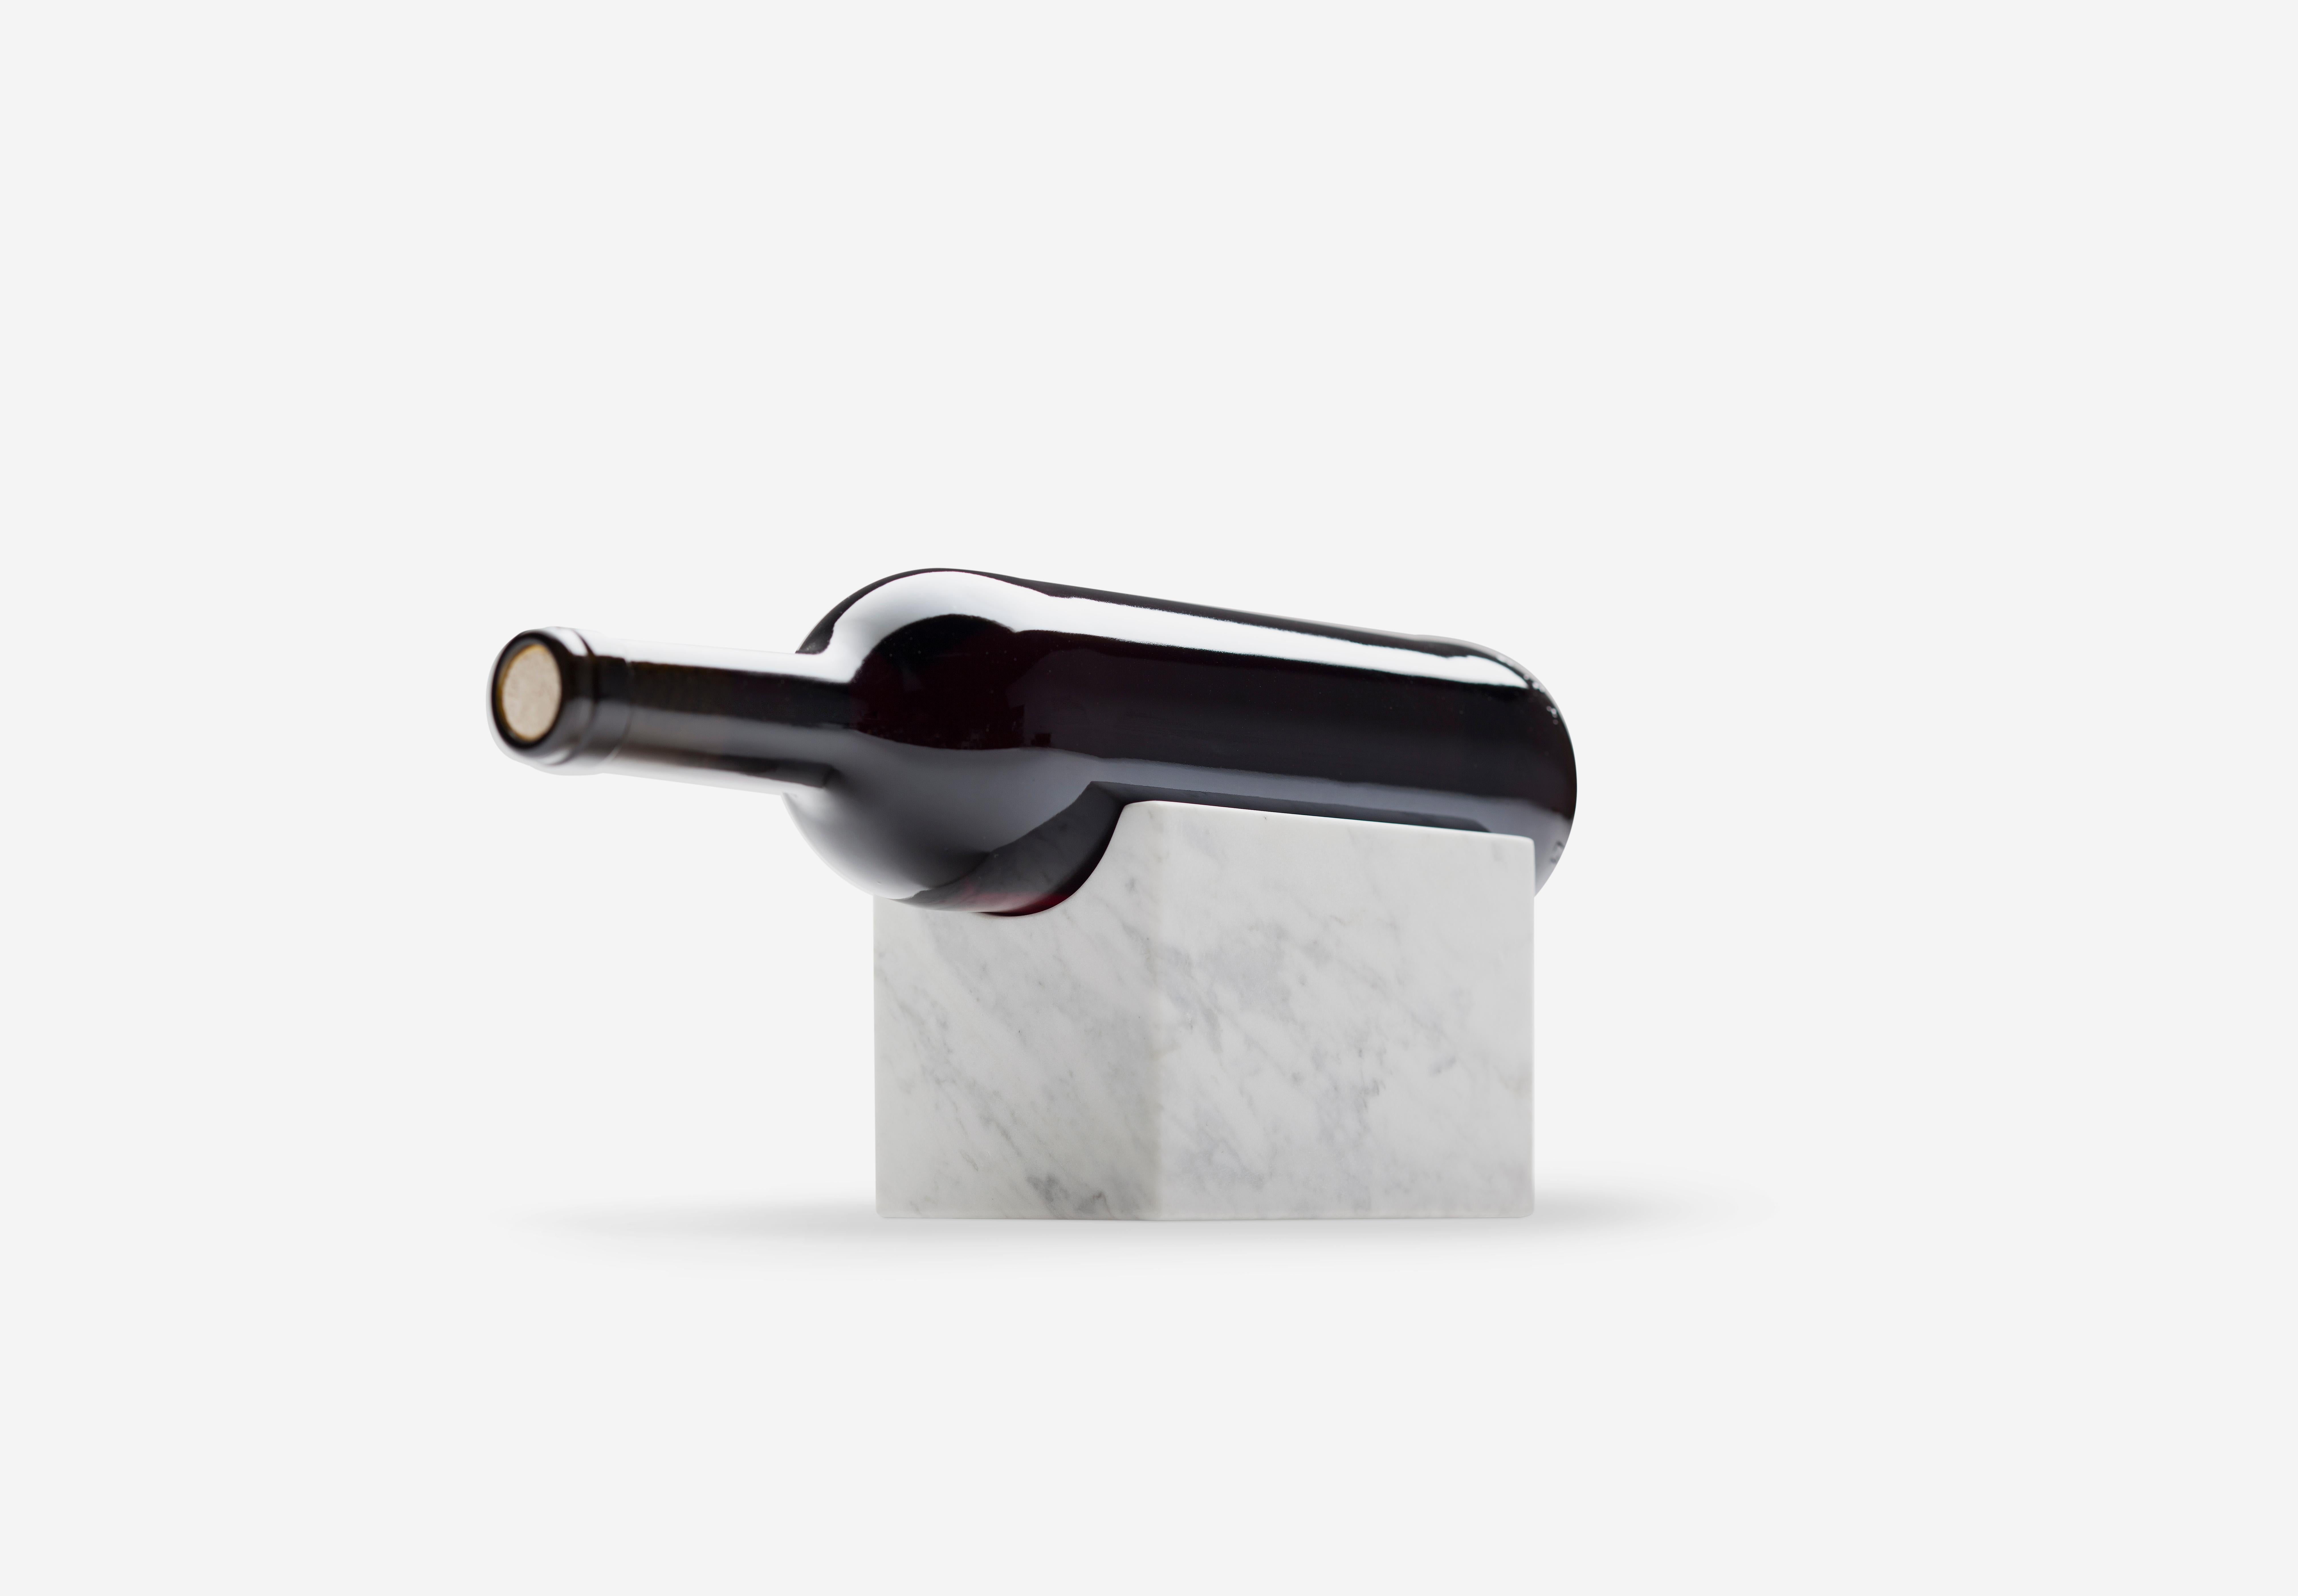 Marble wine holder by Joseph Vila Capdevila
Materials: Carrara marble
Dimensions: 9 x 9 x 13 cm
Weight: 2.5 kg

Aparentment is a space for creation and innovation, experimenting with materials with the goal to develop robust, lasting and